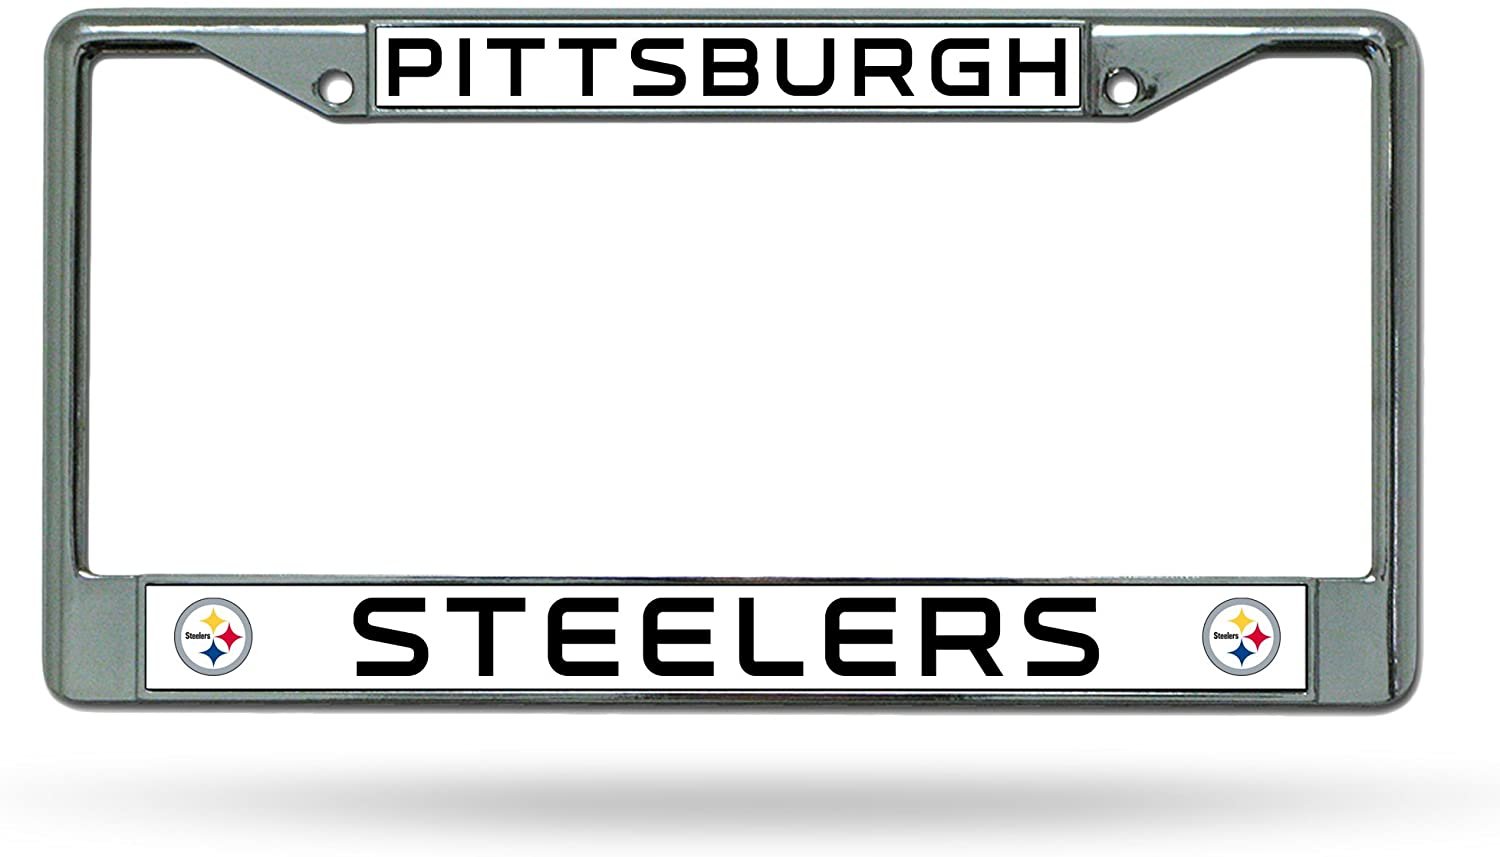 Pittsburgh Steelers Chrome Metal License Plate Frame Tag Cover 6x12 Inches